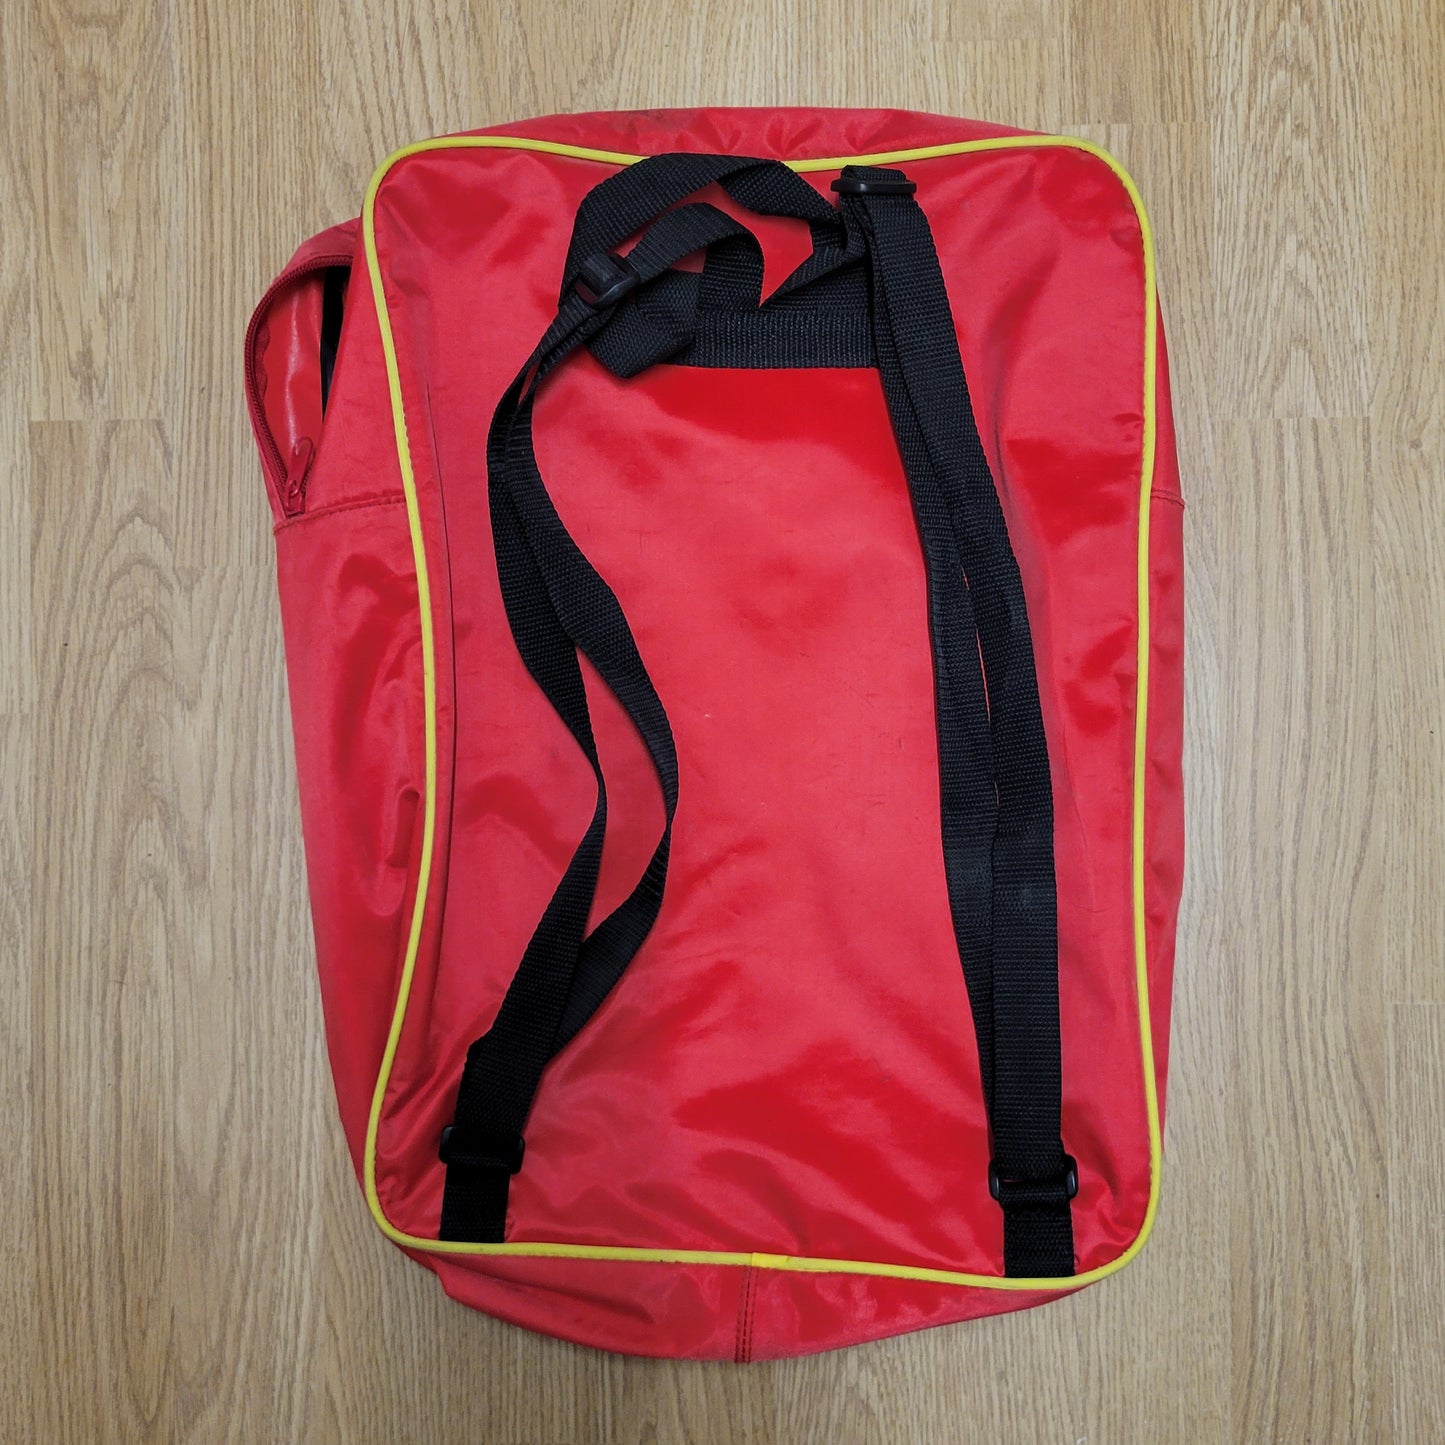 Micro Scalextric Red Canvas Carrying Bag Rucksack